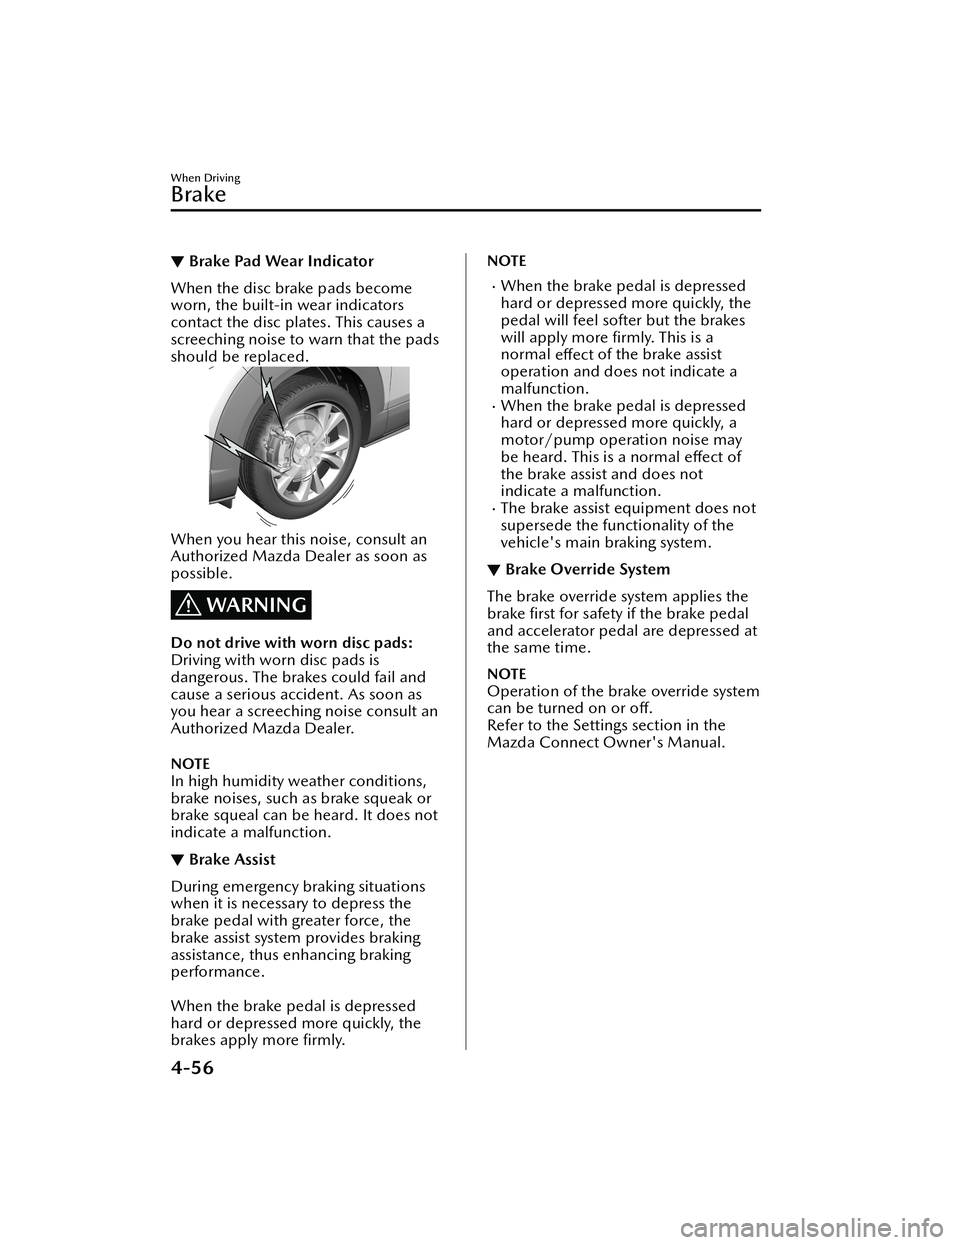 MAZDA MODEL MX-30 EV 2022  Owners Manual ▼Brake Pad Wear Indicator
When the disc brake pads become
worn, the built-in wear indicators
contact the disc plates. This causes a
screeching noise to warn that the pads
should be replaced.
When yo